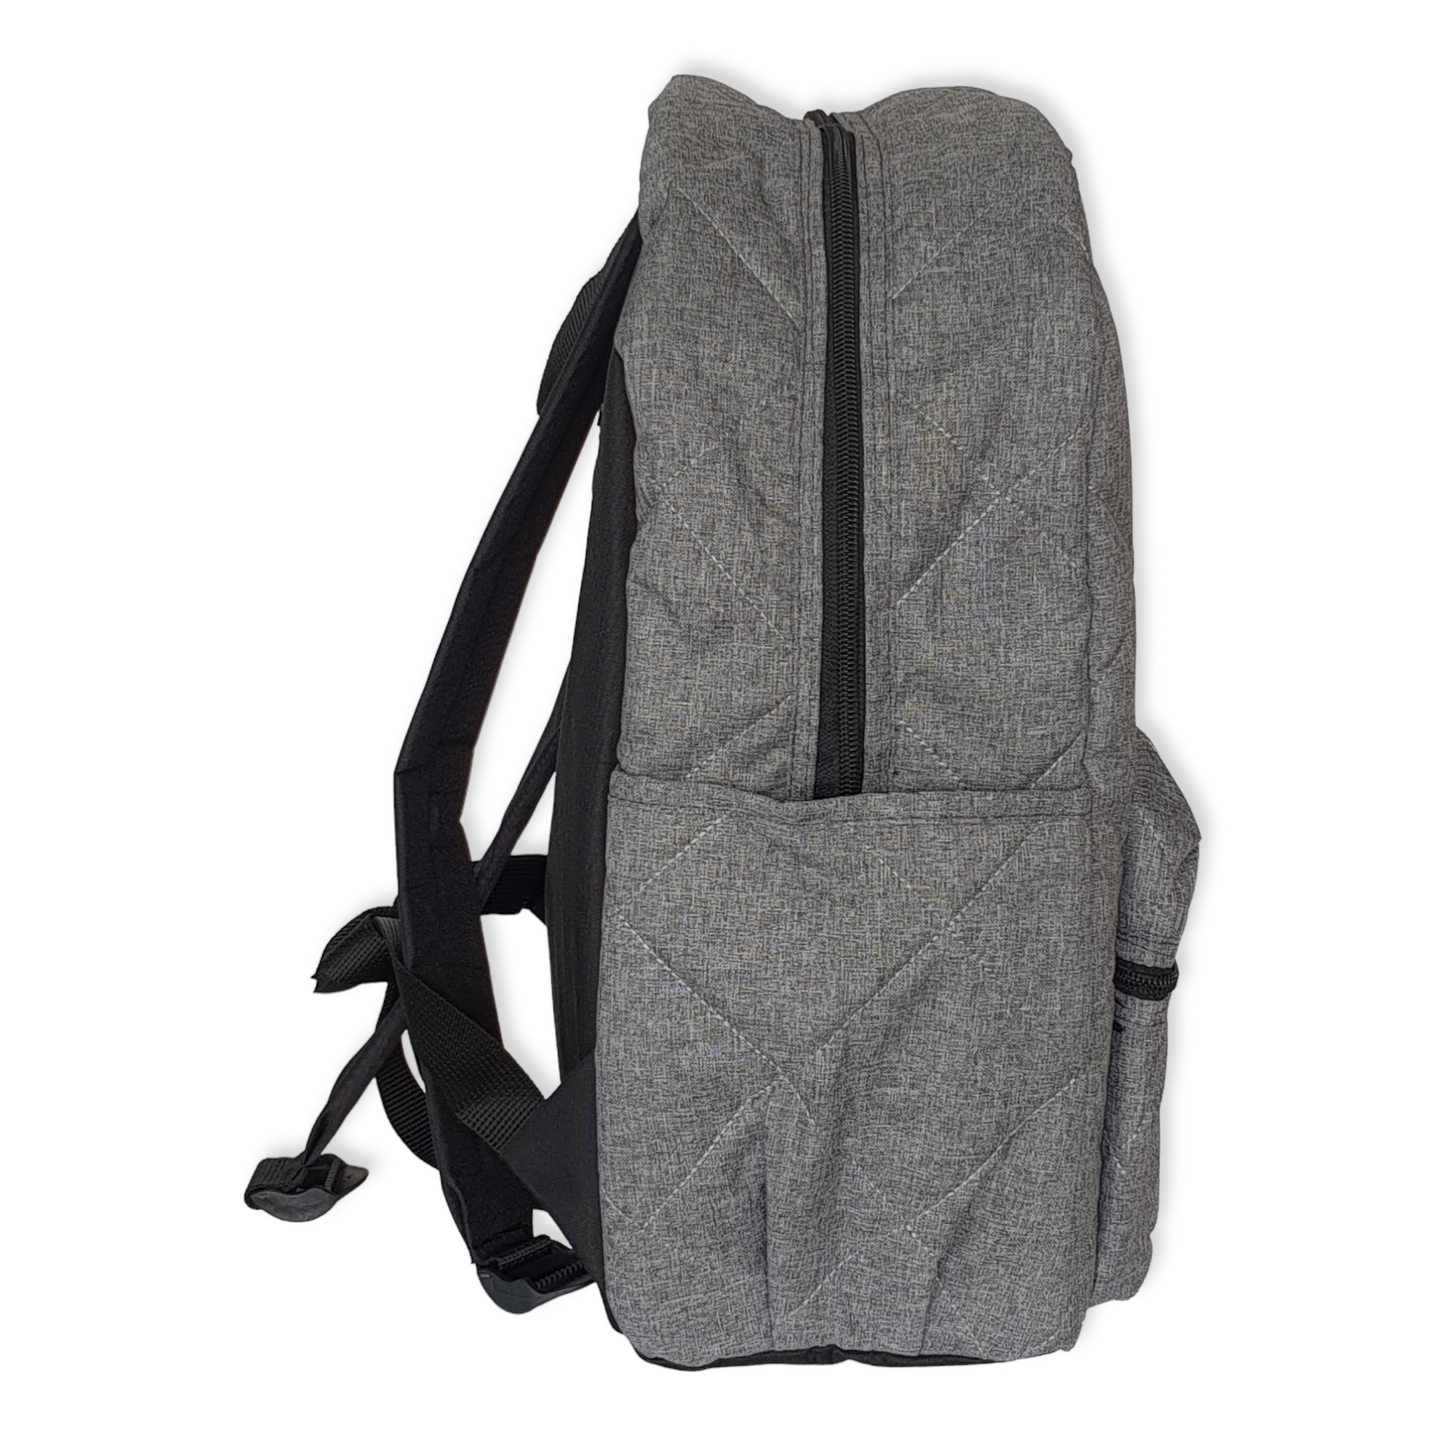 Light Grey Mommy Bag-Bag, Bags, Burgundy, catbabygear, catbag, Changing, Diapers, Grey, Maternity, Nappy, Nursery, Travel-Mollsbaby-[Too Twee]-[Tootwee]-[baby]-[newborn]-[clothes]-[essentials]-[toys]-[Lebanon]